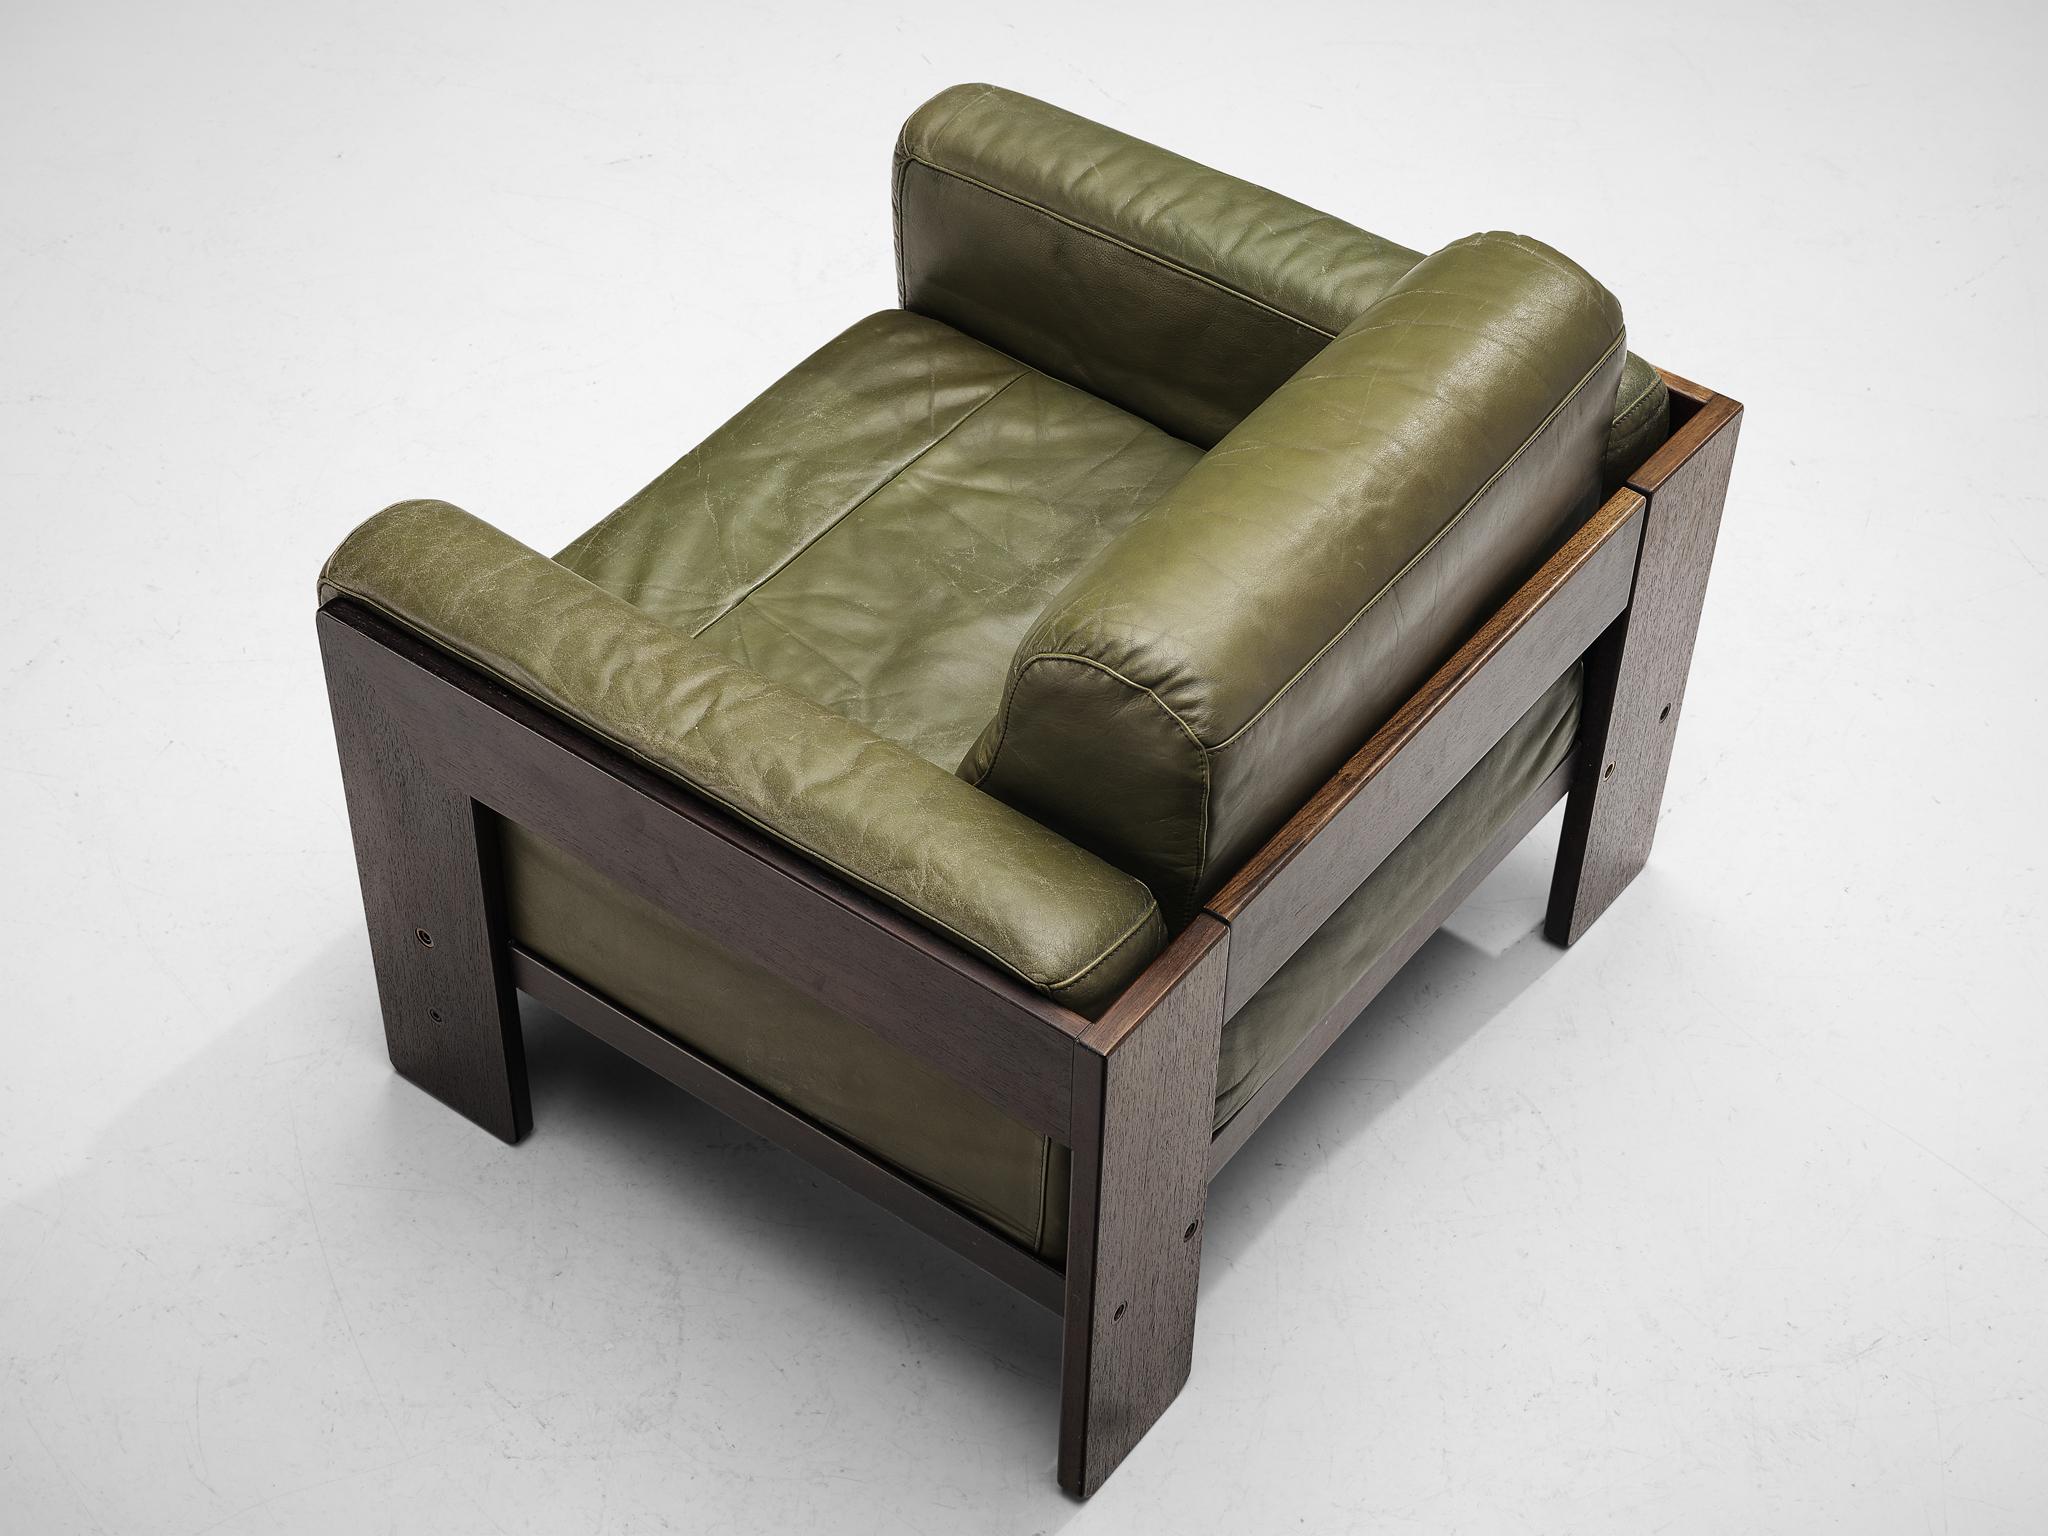 Afra & Tobia Scarpa for Knoll 'Bastiano' Lounge Chair in Olive Green Leather 1